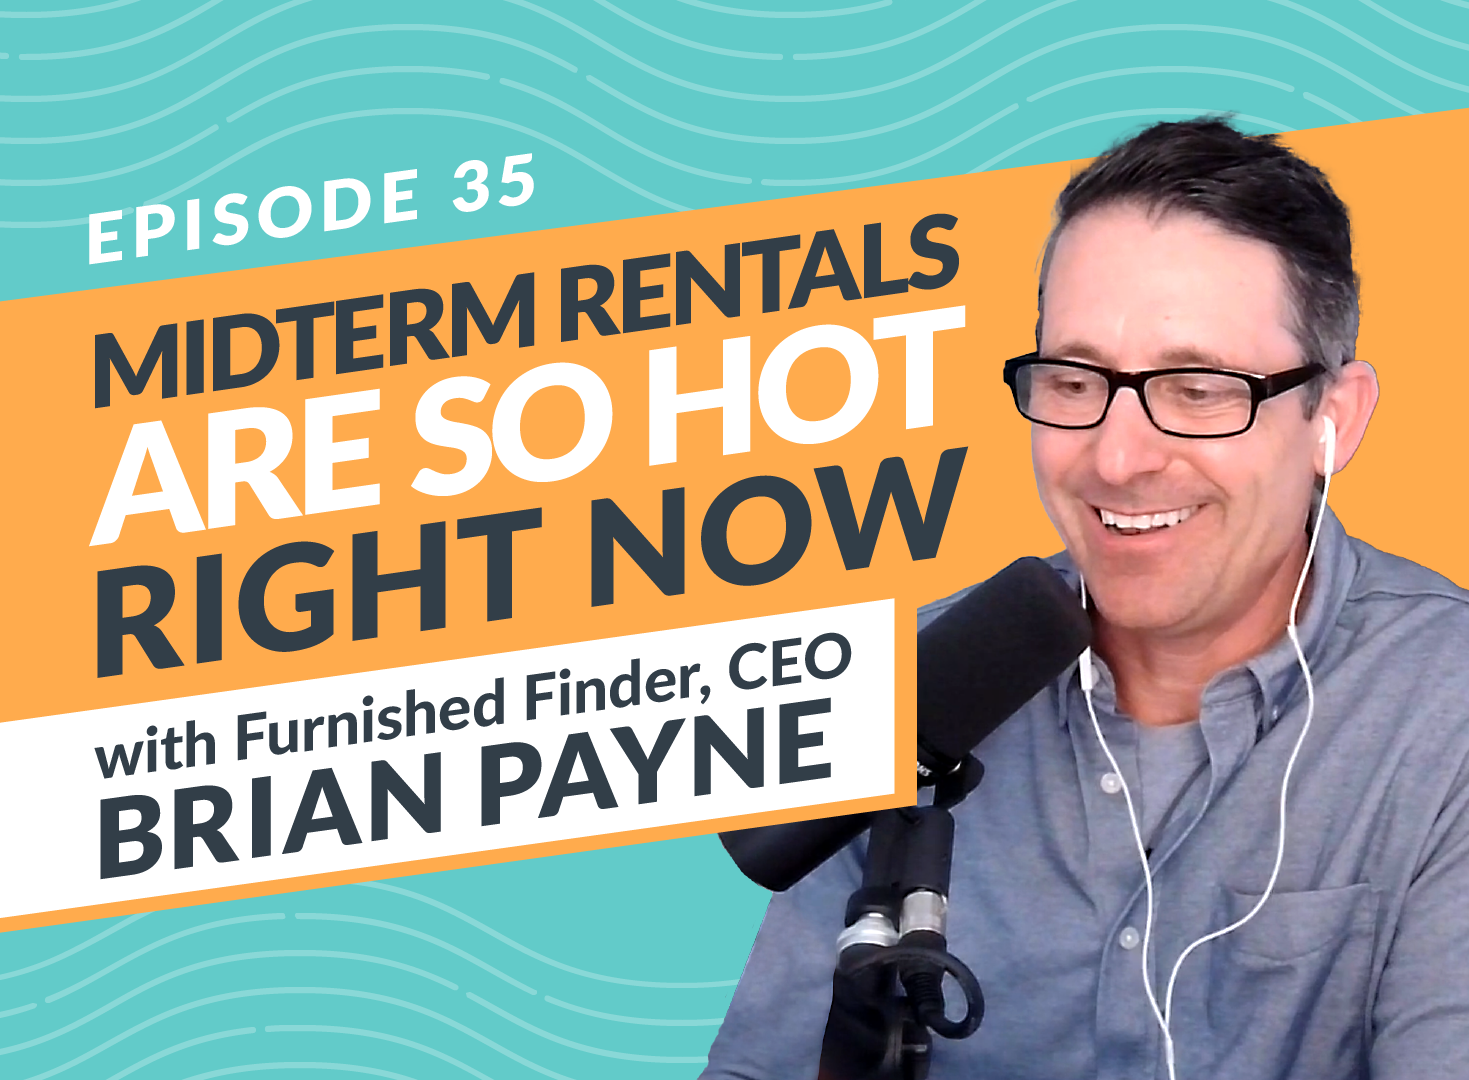 CEO of Furnished Finder, Brian Payne